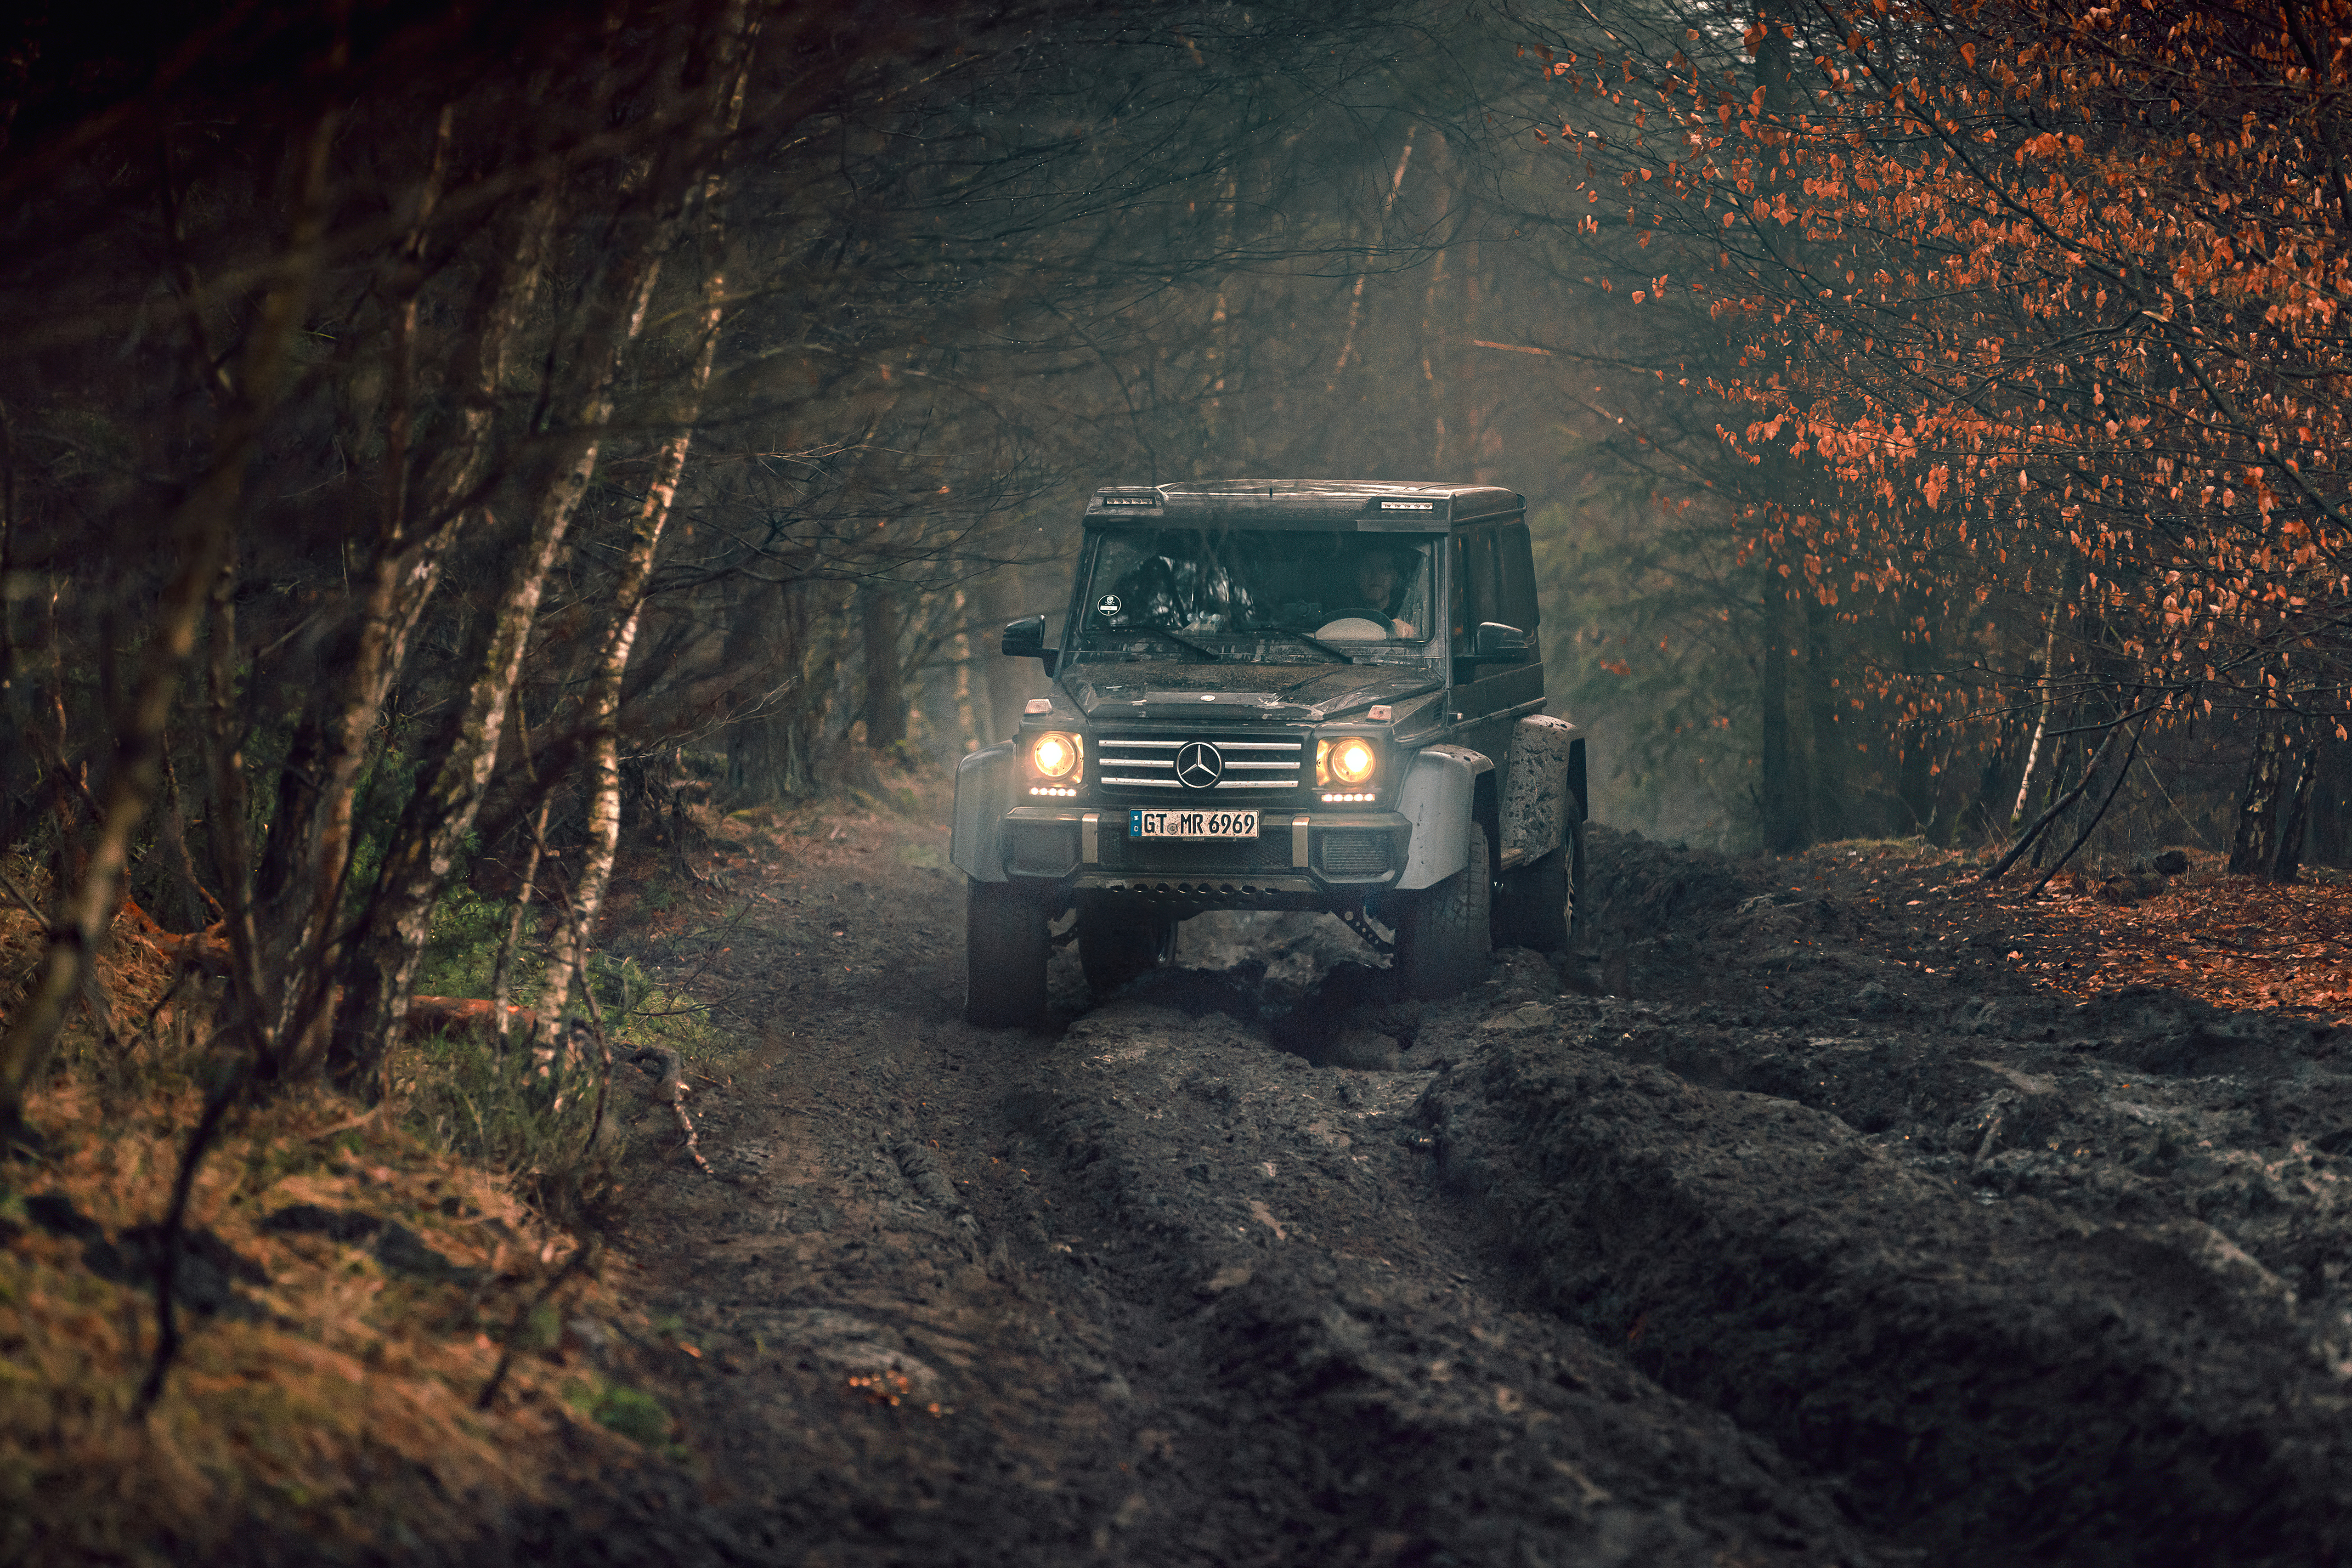 Black Mercedes G Class rides in the mud